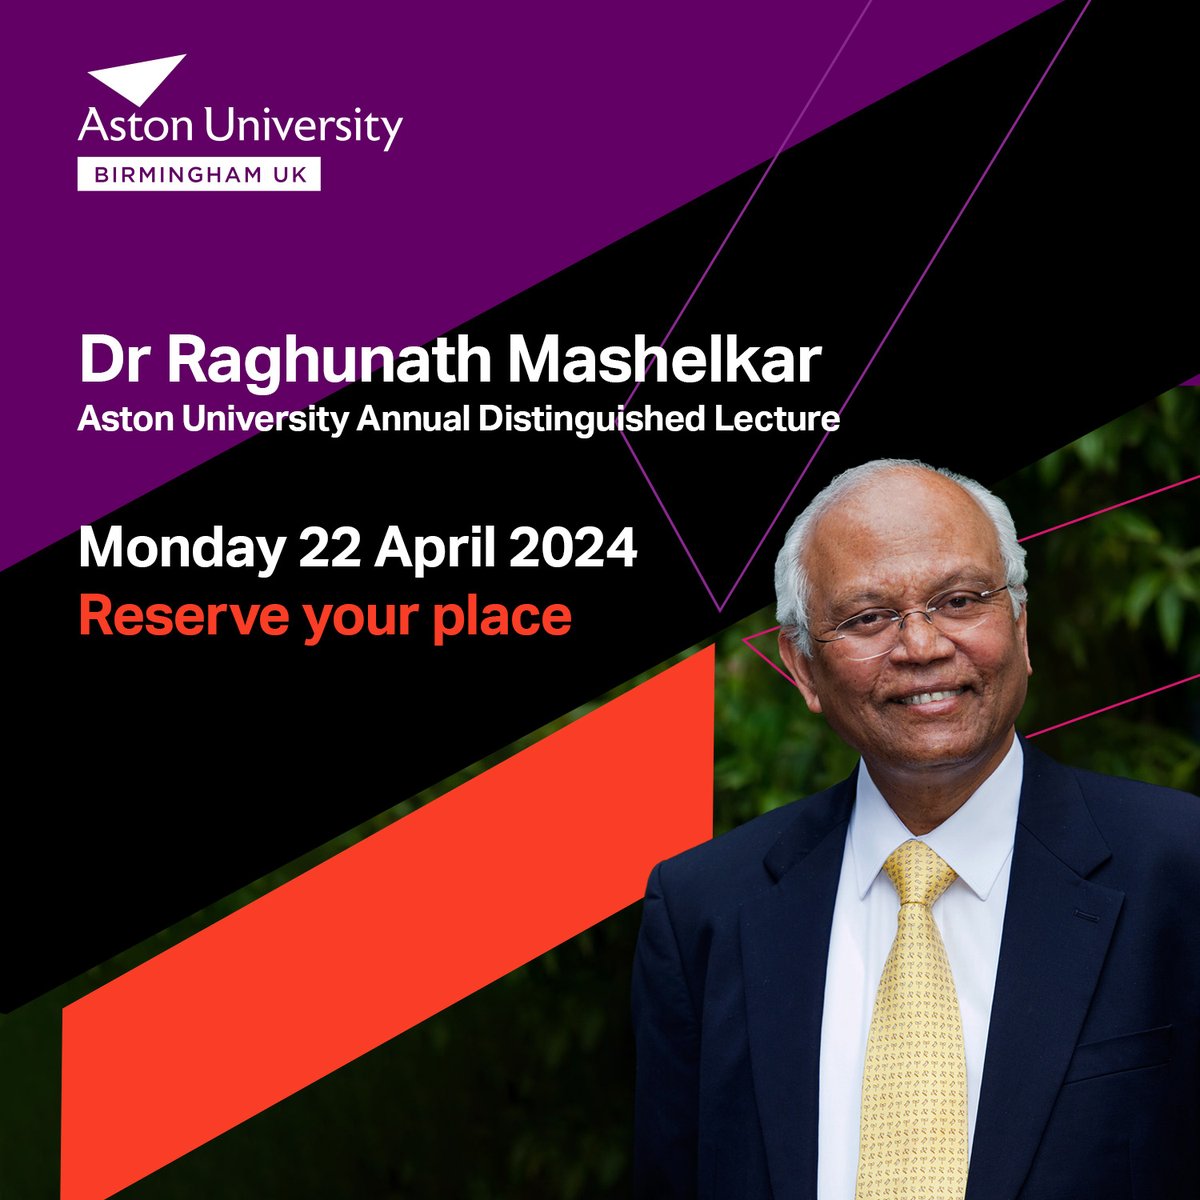 👨‍🔬Renowned science leader Professor Raghunath Mashelkar to deliver a Distinguished Lecture. A storied career: 🇮🇳 former Director General of the Indian Council of Scientific and Industrial Research. 🏆winner of USA Business Week ‘Stars of Asia’ award. tinyurl.com/465jdds8